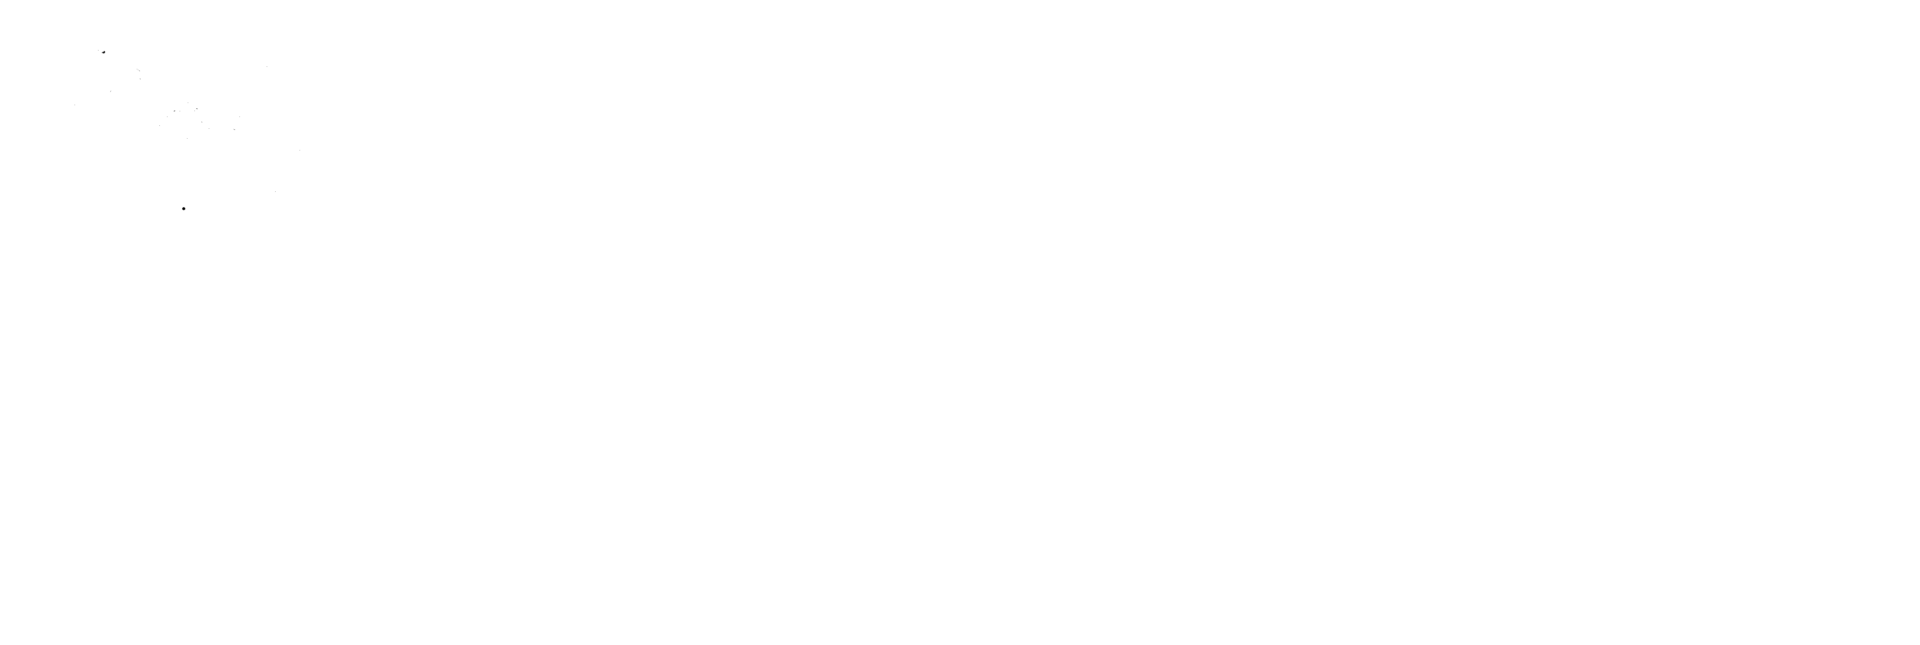 Department for Levelling Up,
Housing & Communities Logo